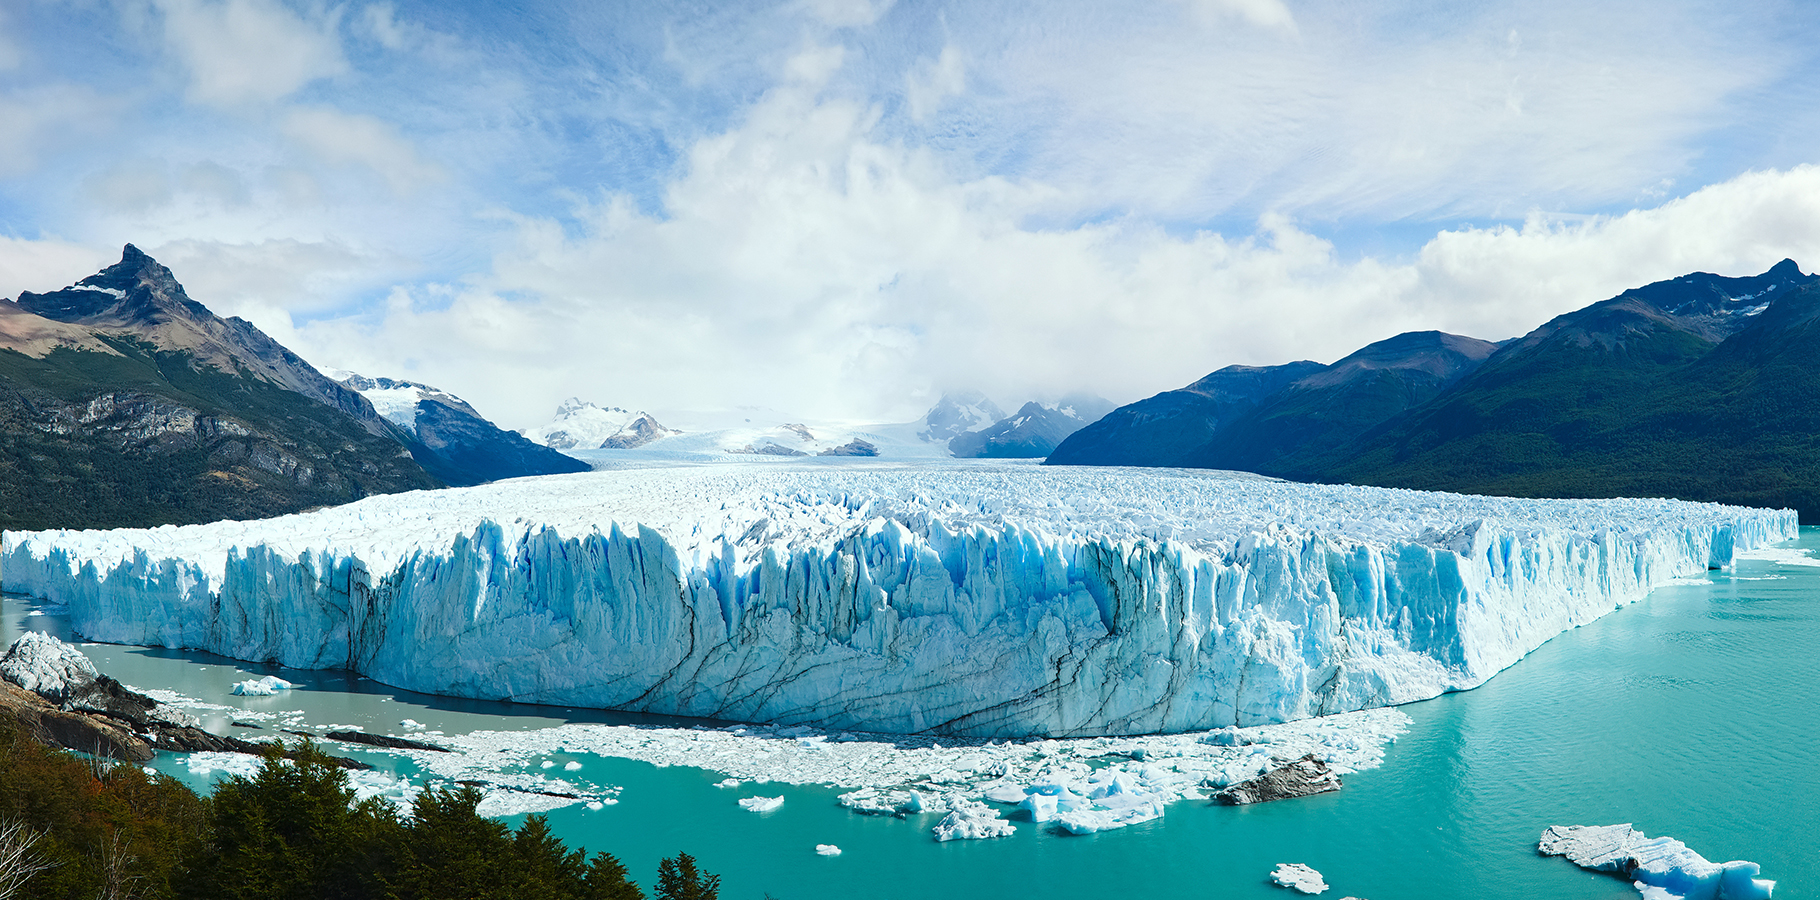 Jounrey to the Southern Patagonia Ice Fields with Exploradus